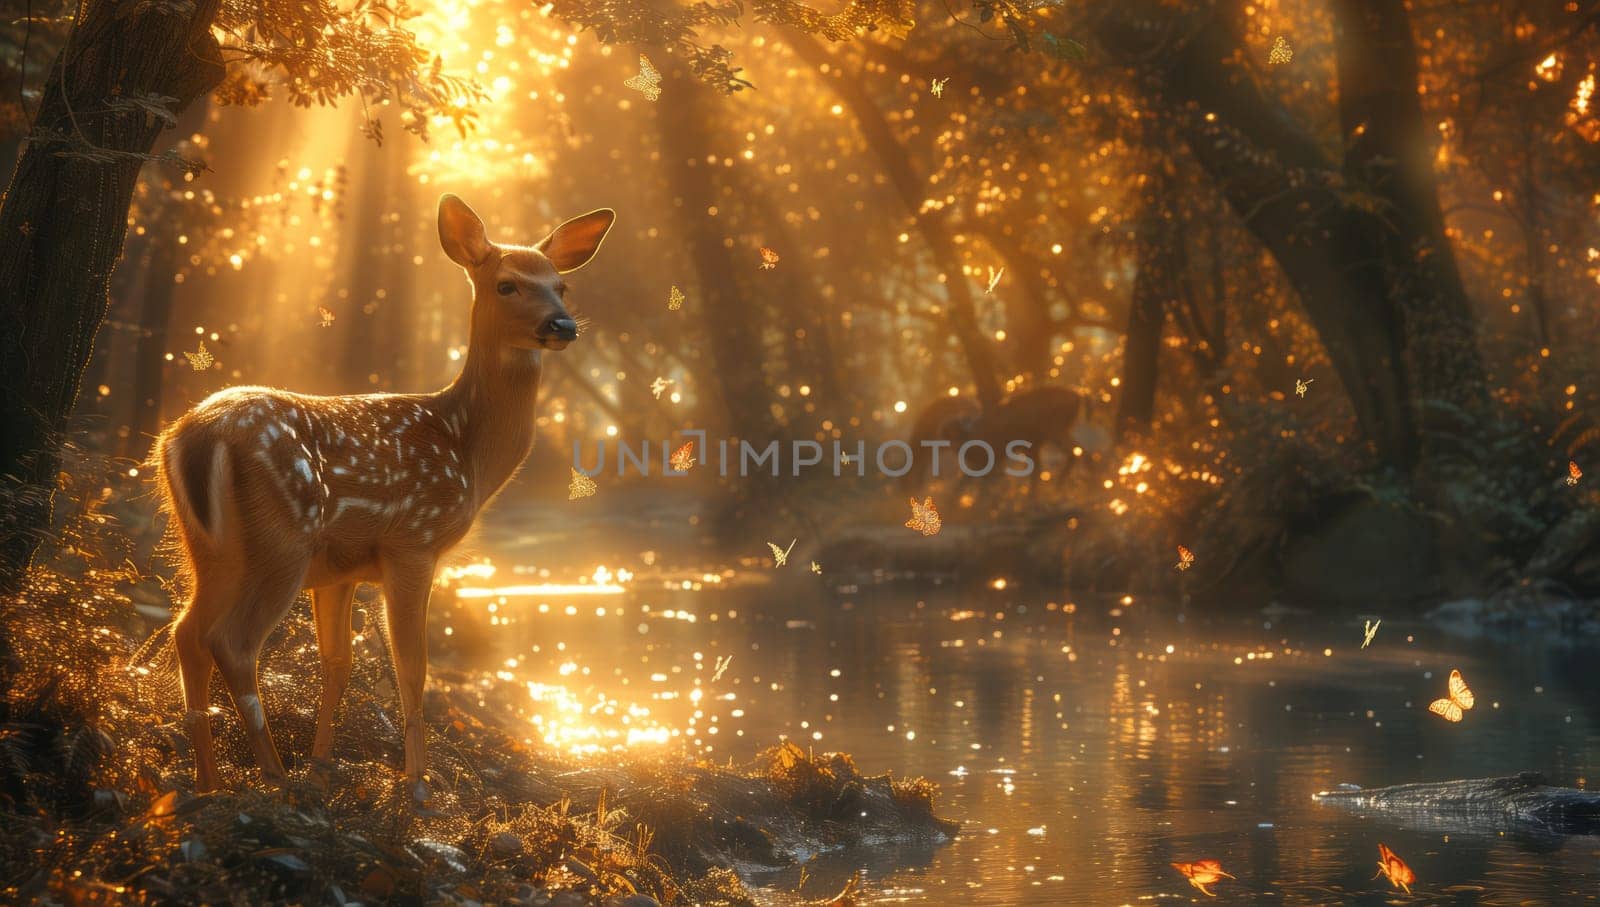 A deer by a river in a woodland, surrounded by natures beauty by richwolf